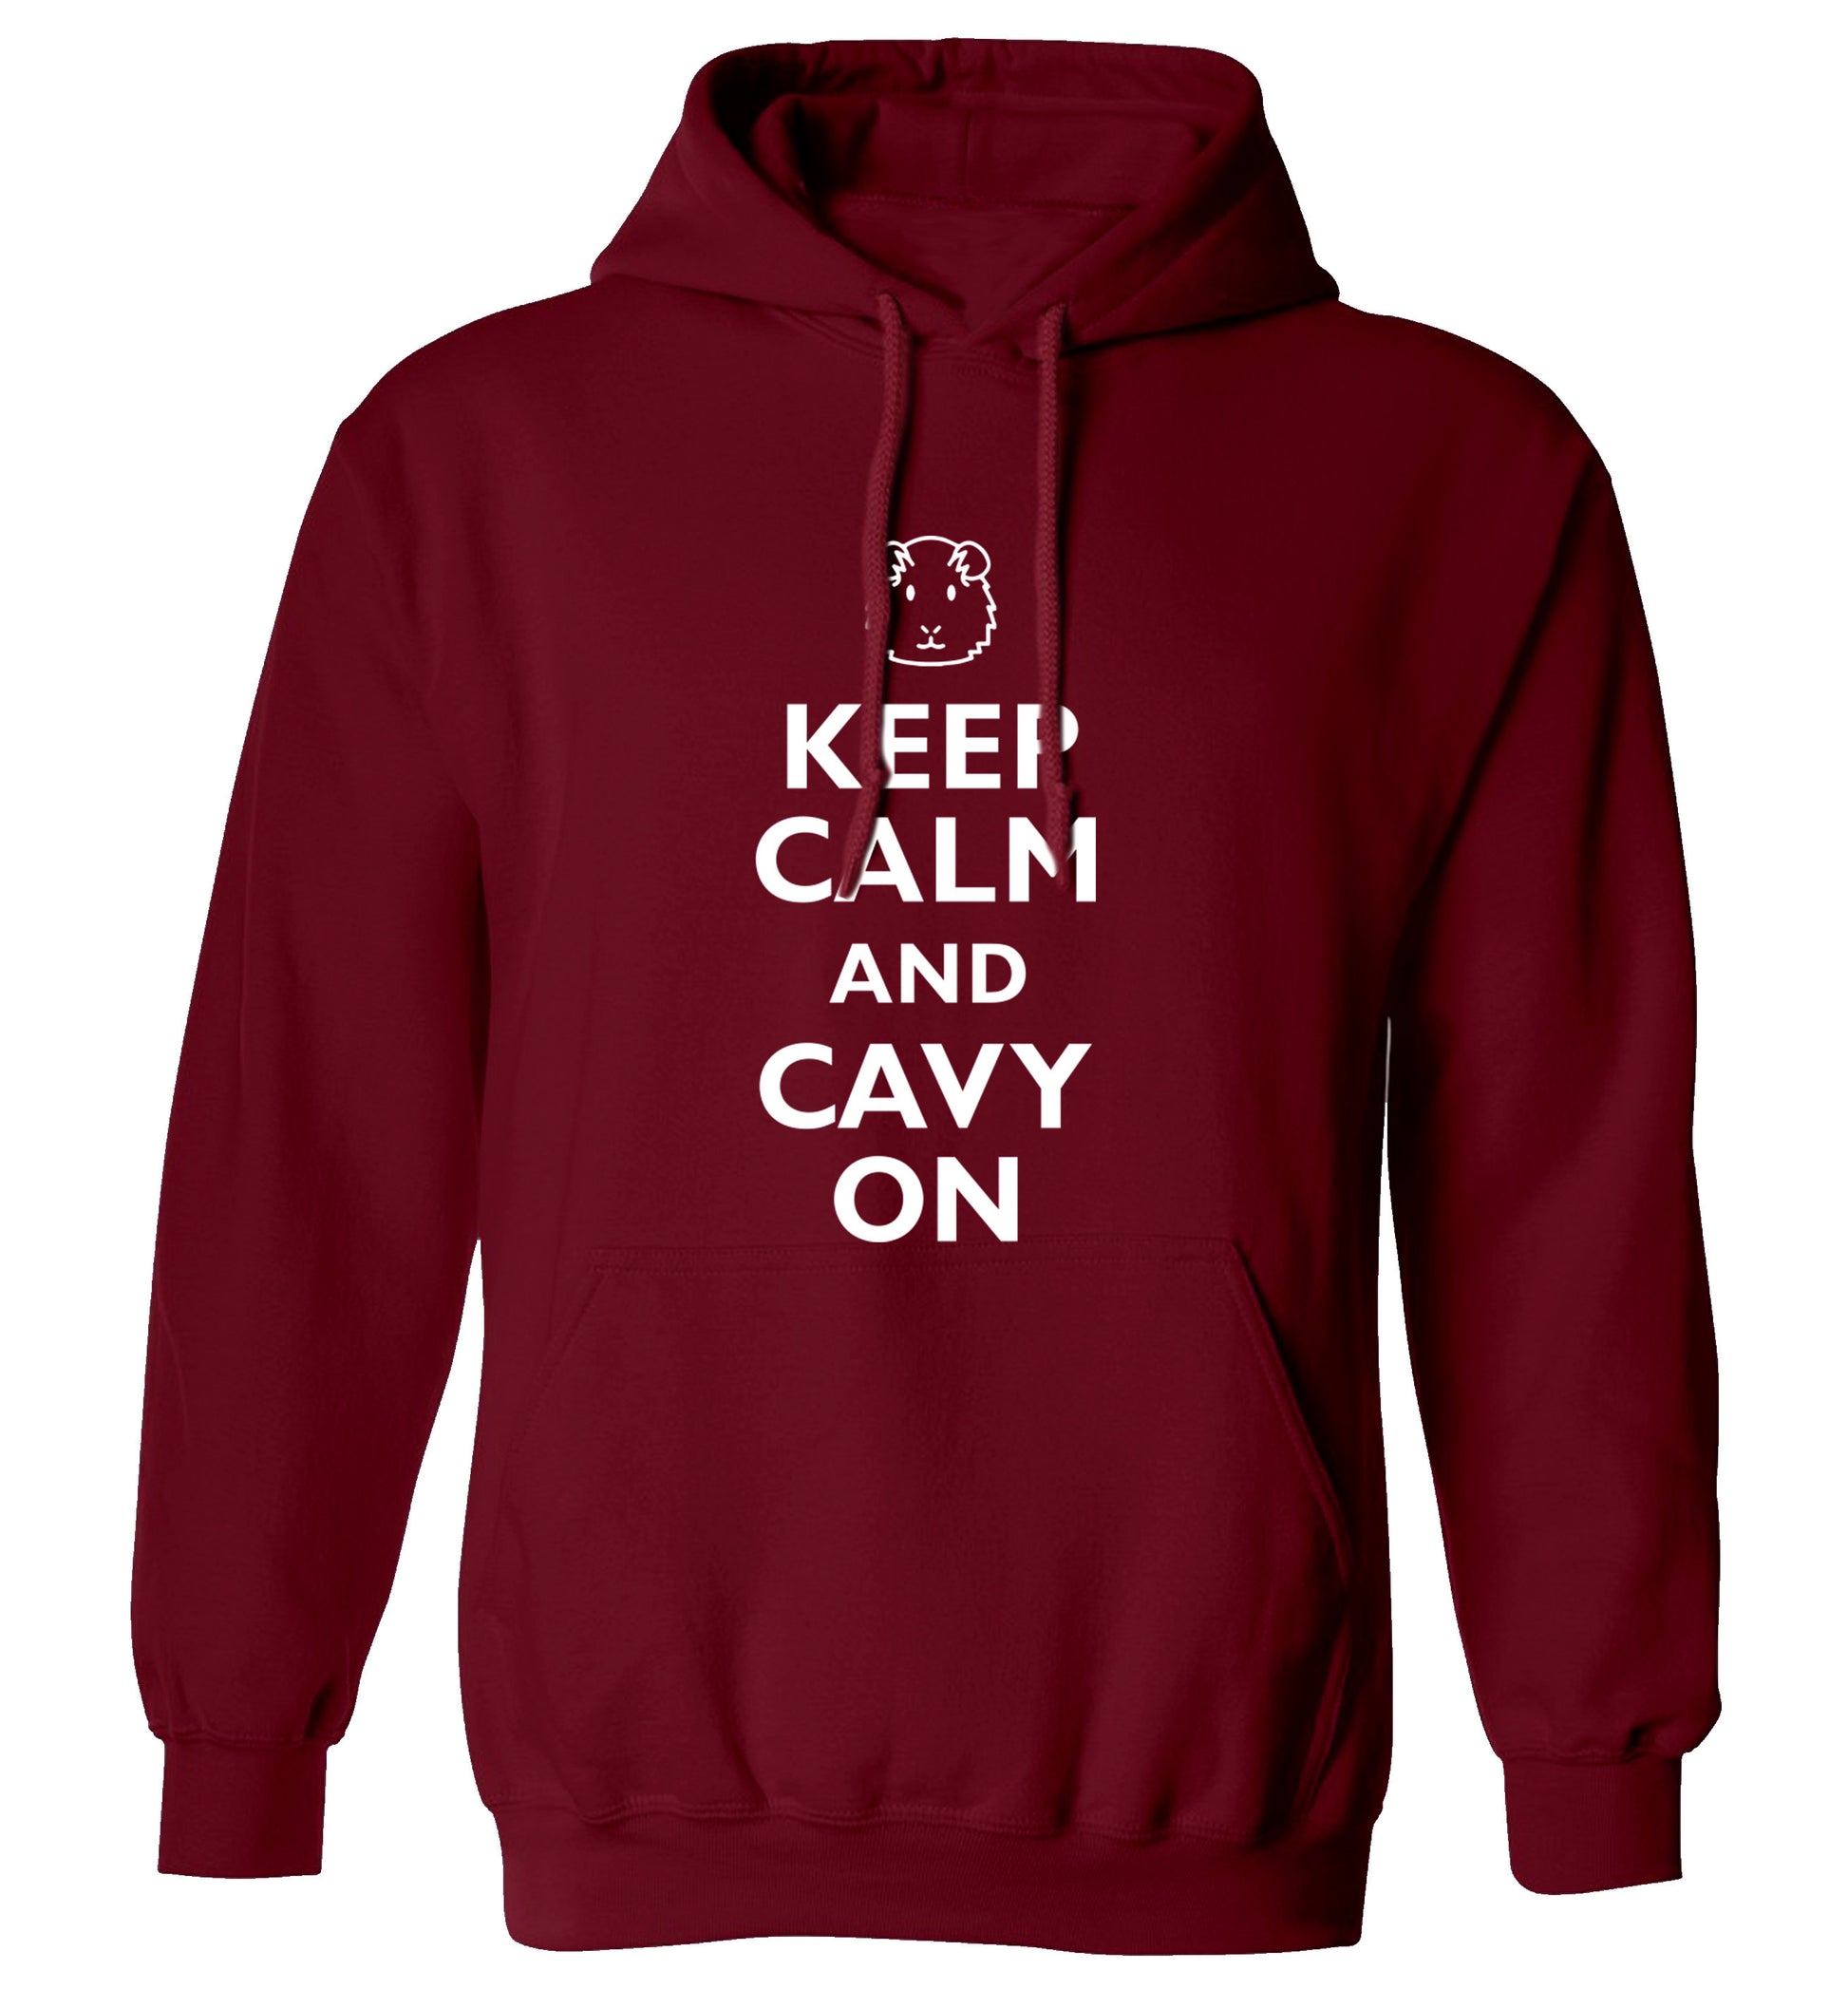 Keep calm and cavvy on adults unisex maroon hoodie 2XL